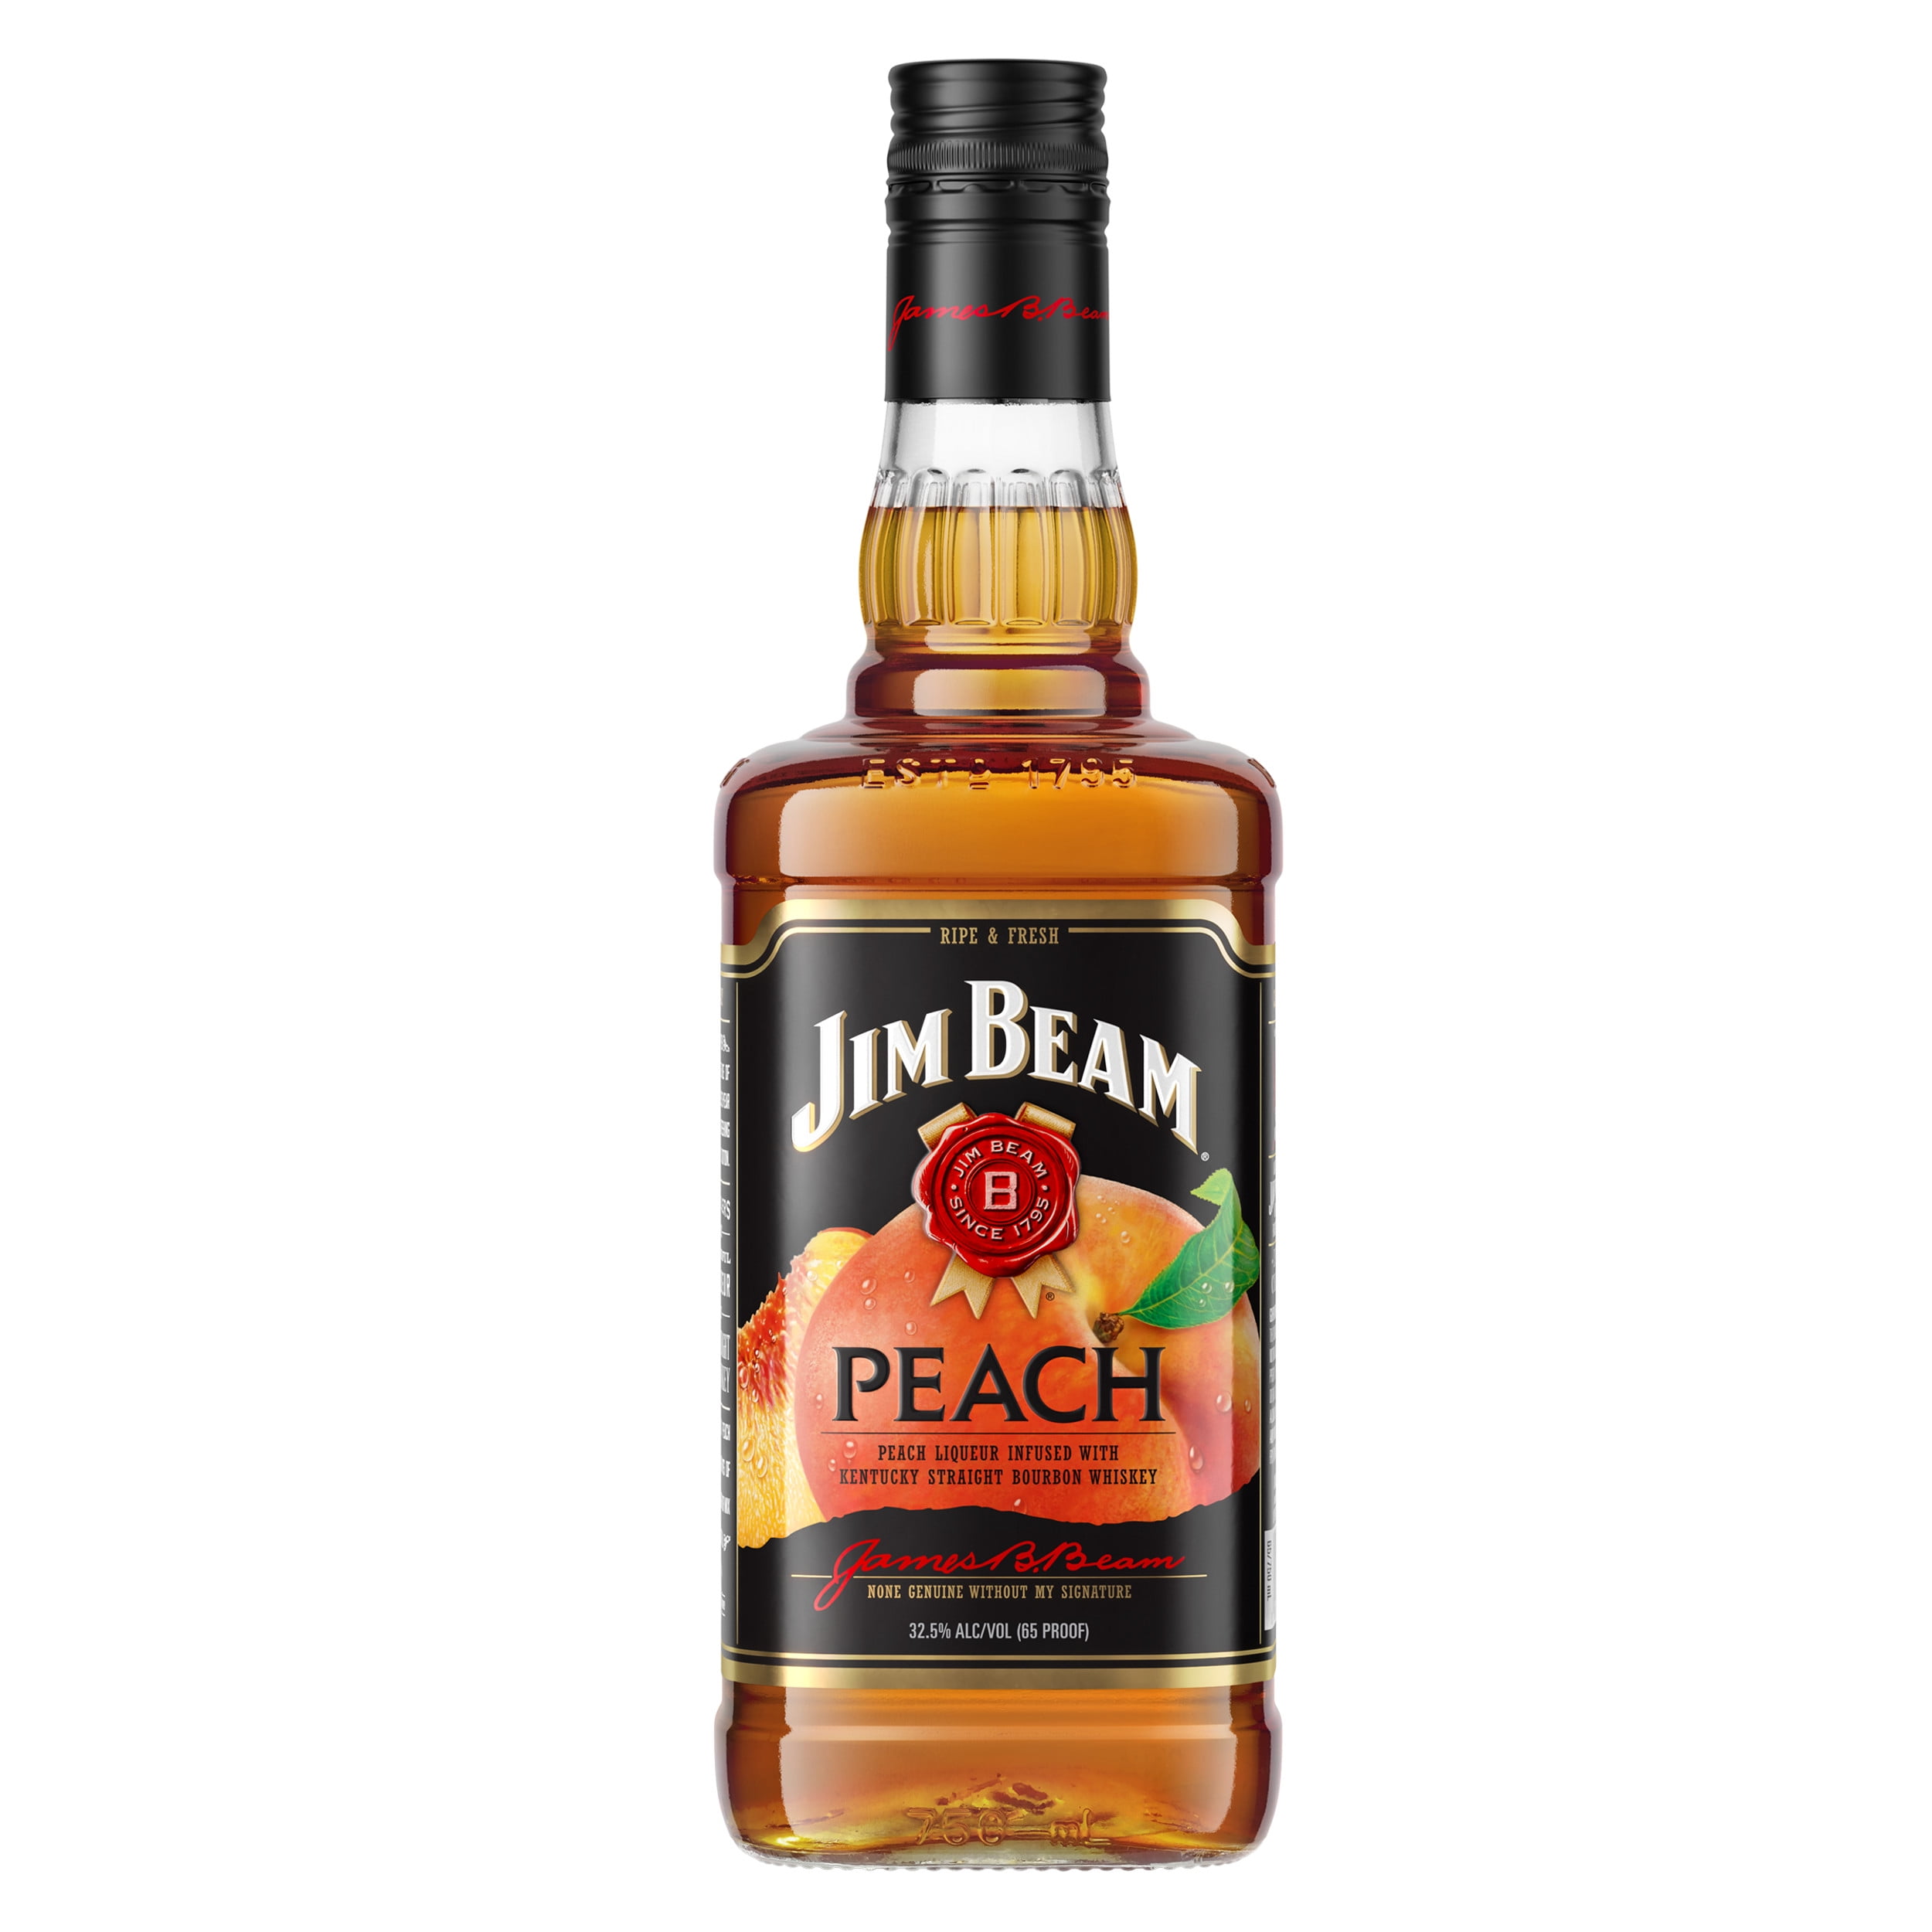 Jim Beam Peach ml Infused ABV Bottle, Whiskey, Bourbon 32.5% Flavored 750 Straight